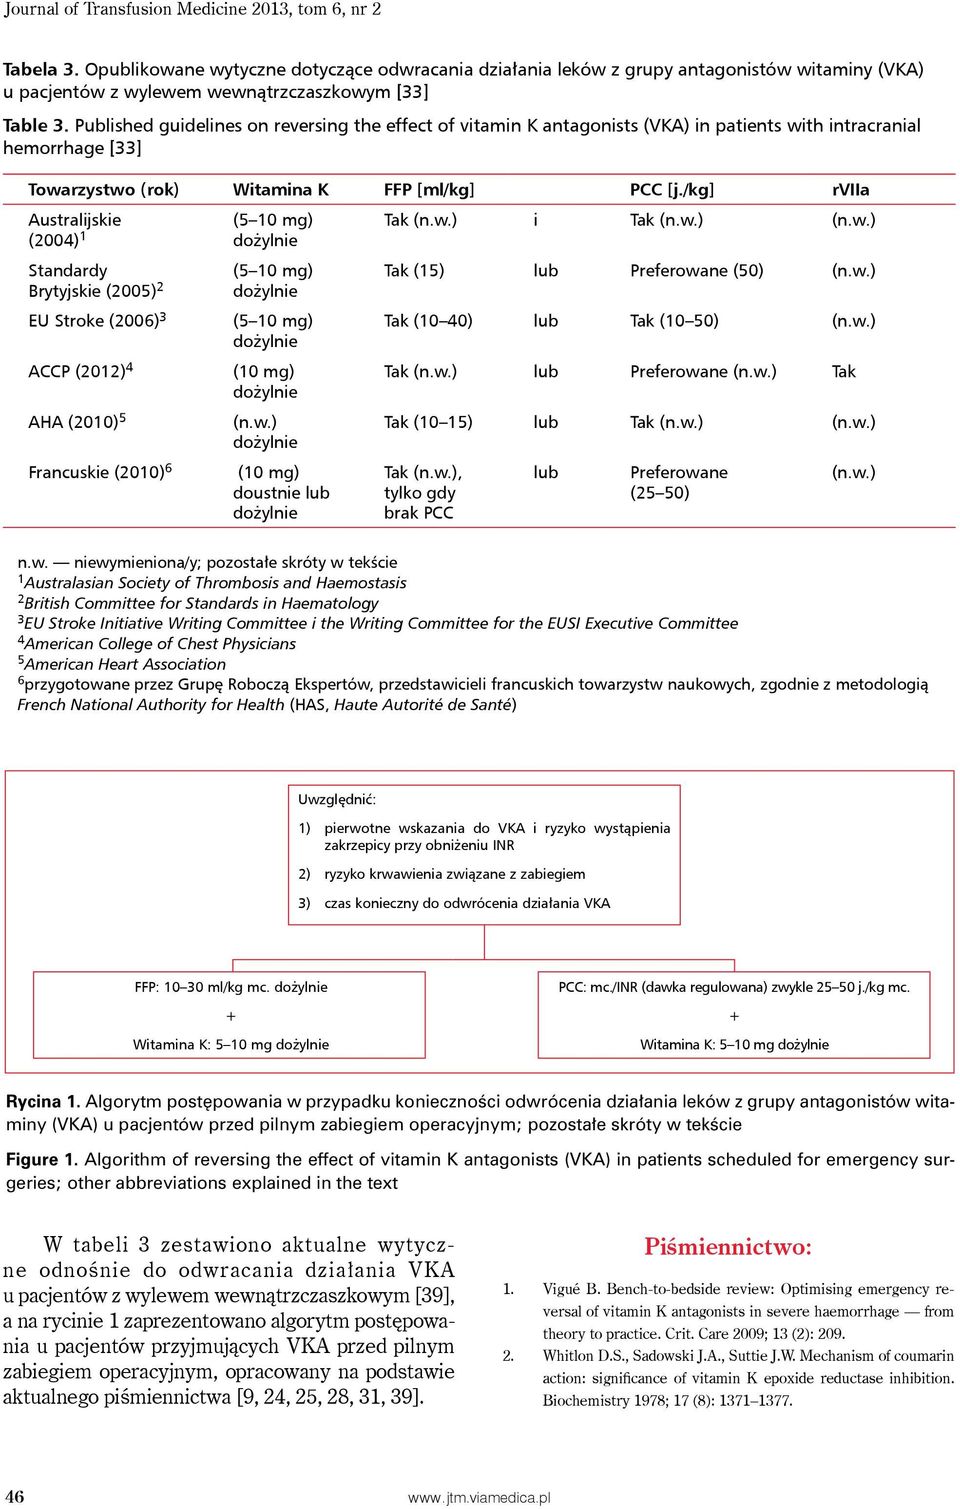 Published guidelines on reversing the effect of vitamin K antagonists (VKA) in patients with intracranial hemorrhage [33] Towarzystwo (rok) Witamina K FFP [ml/kg] PCC [j.